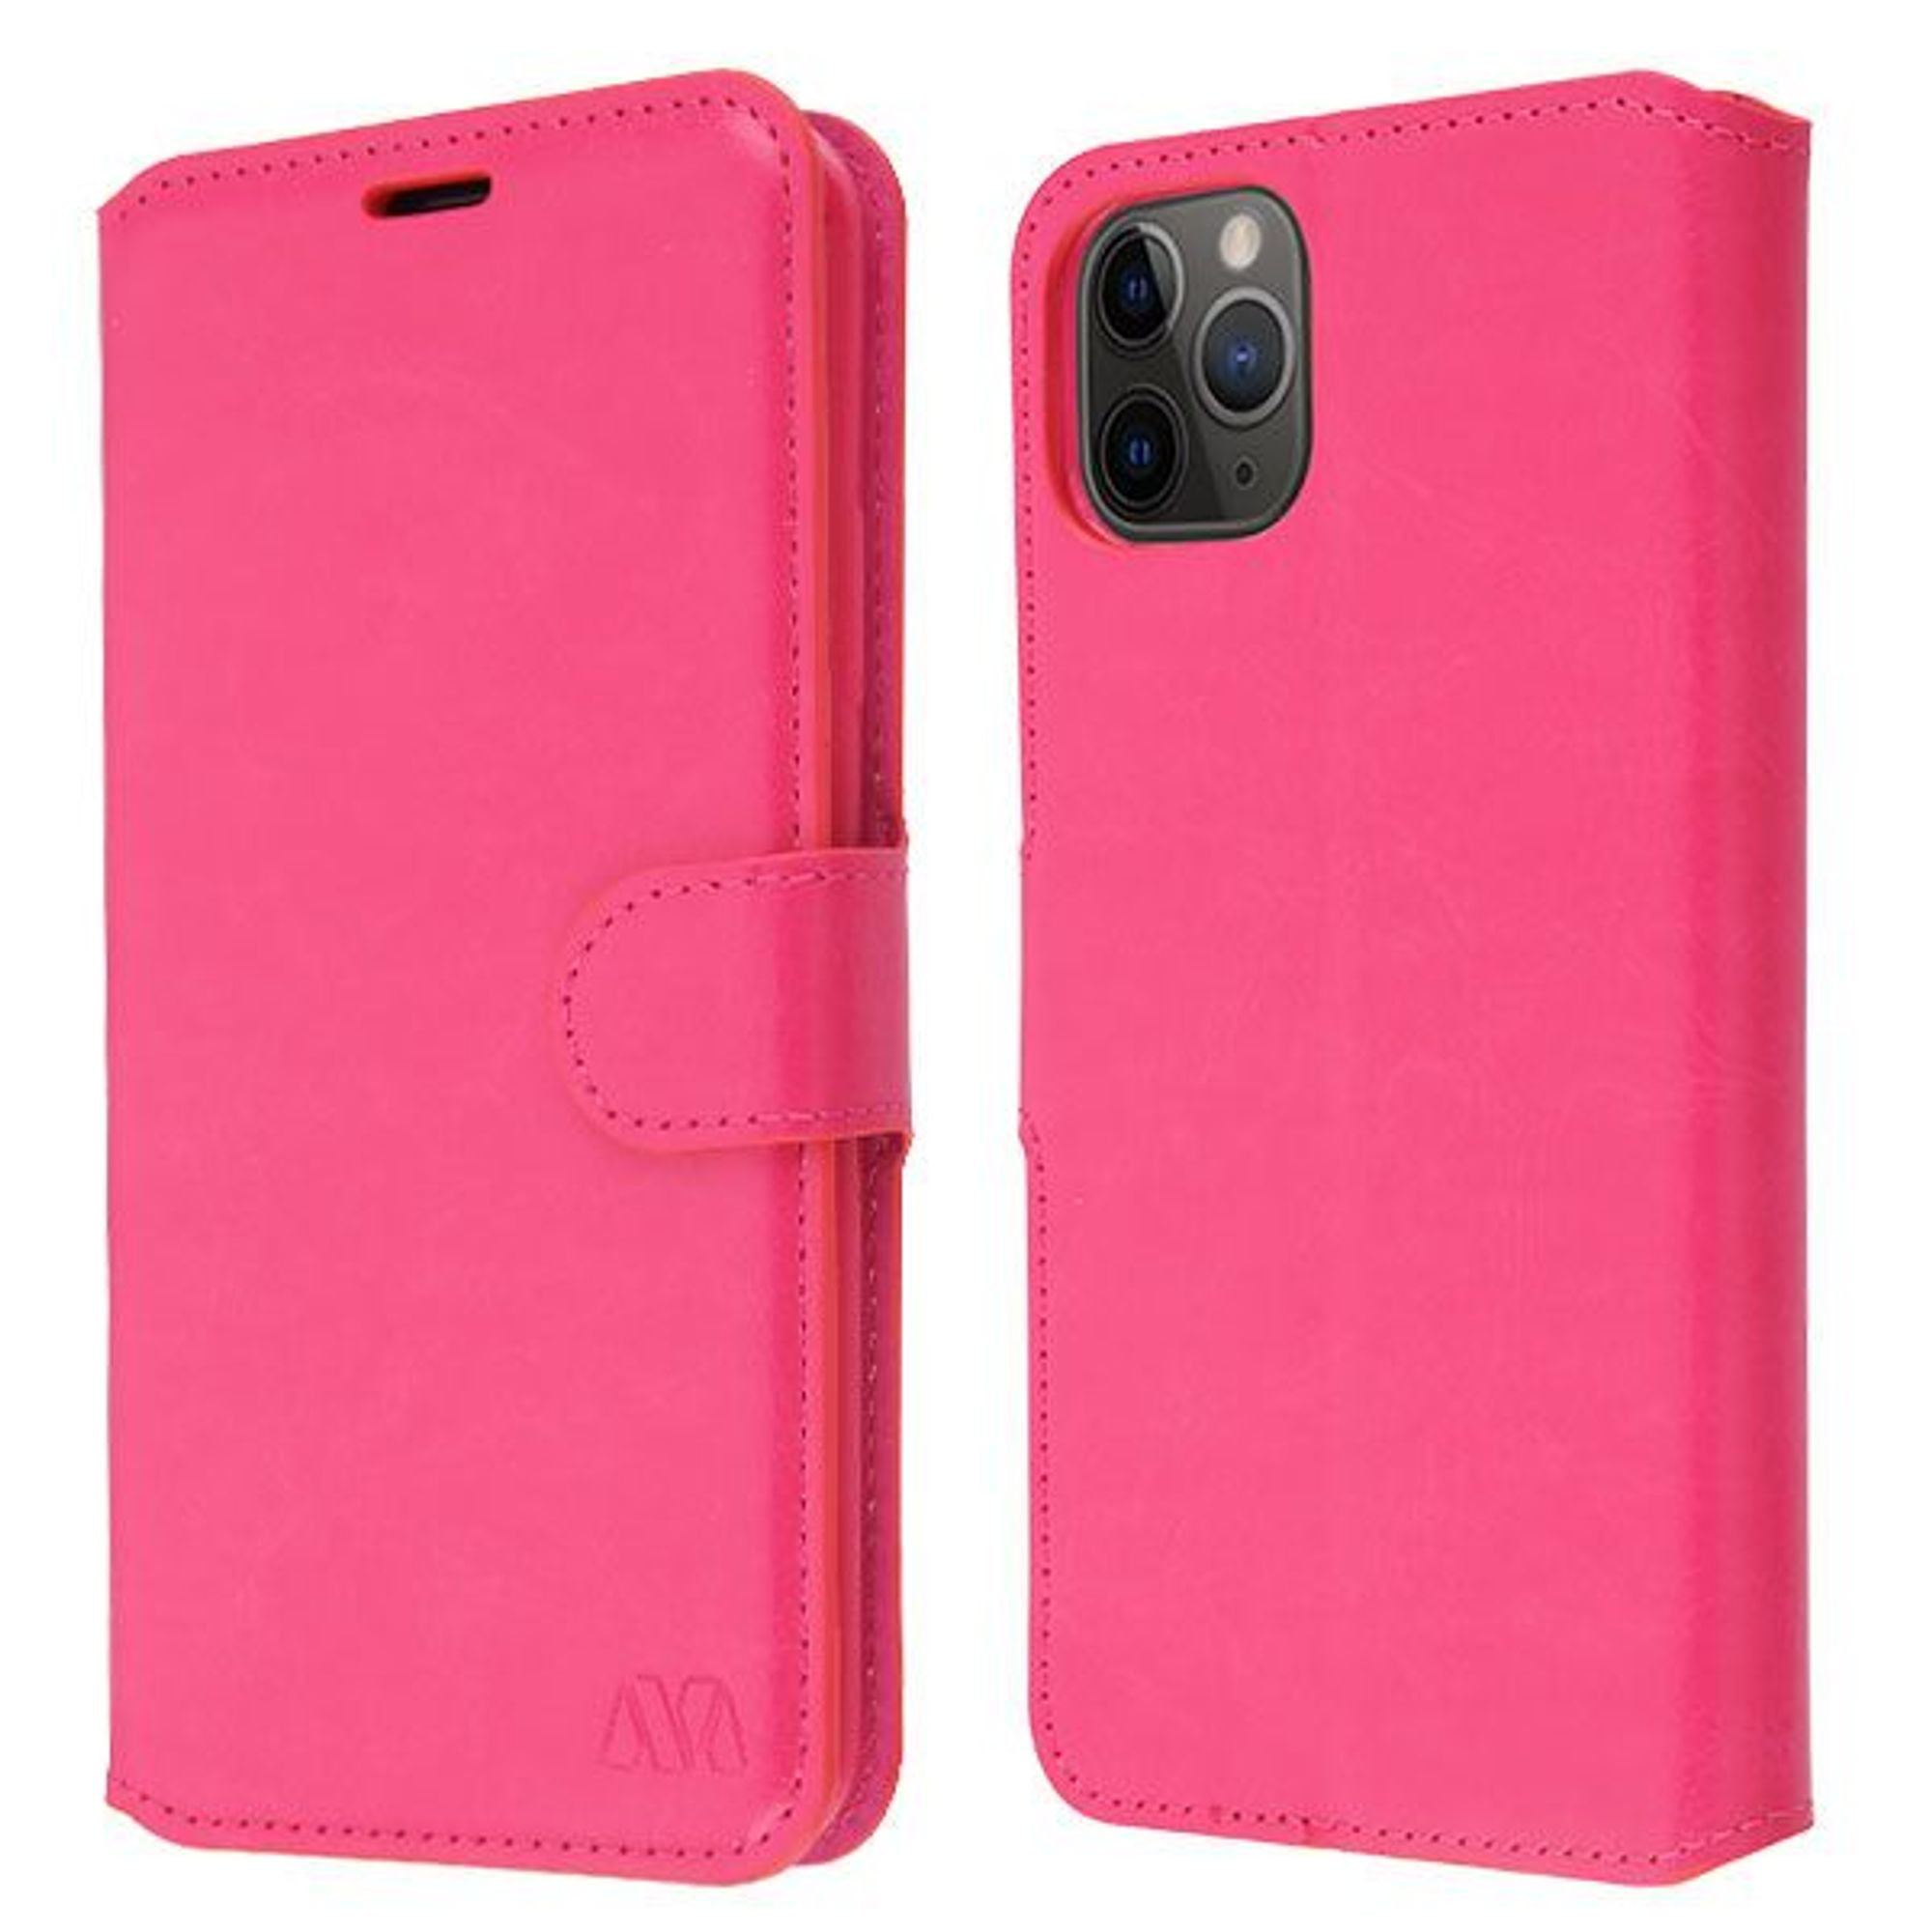 For Apple iPhone 11 Pro Max Case, by Insten MyJacket